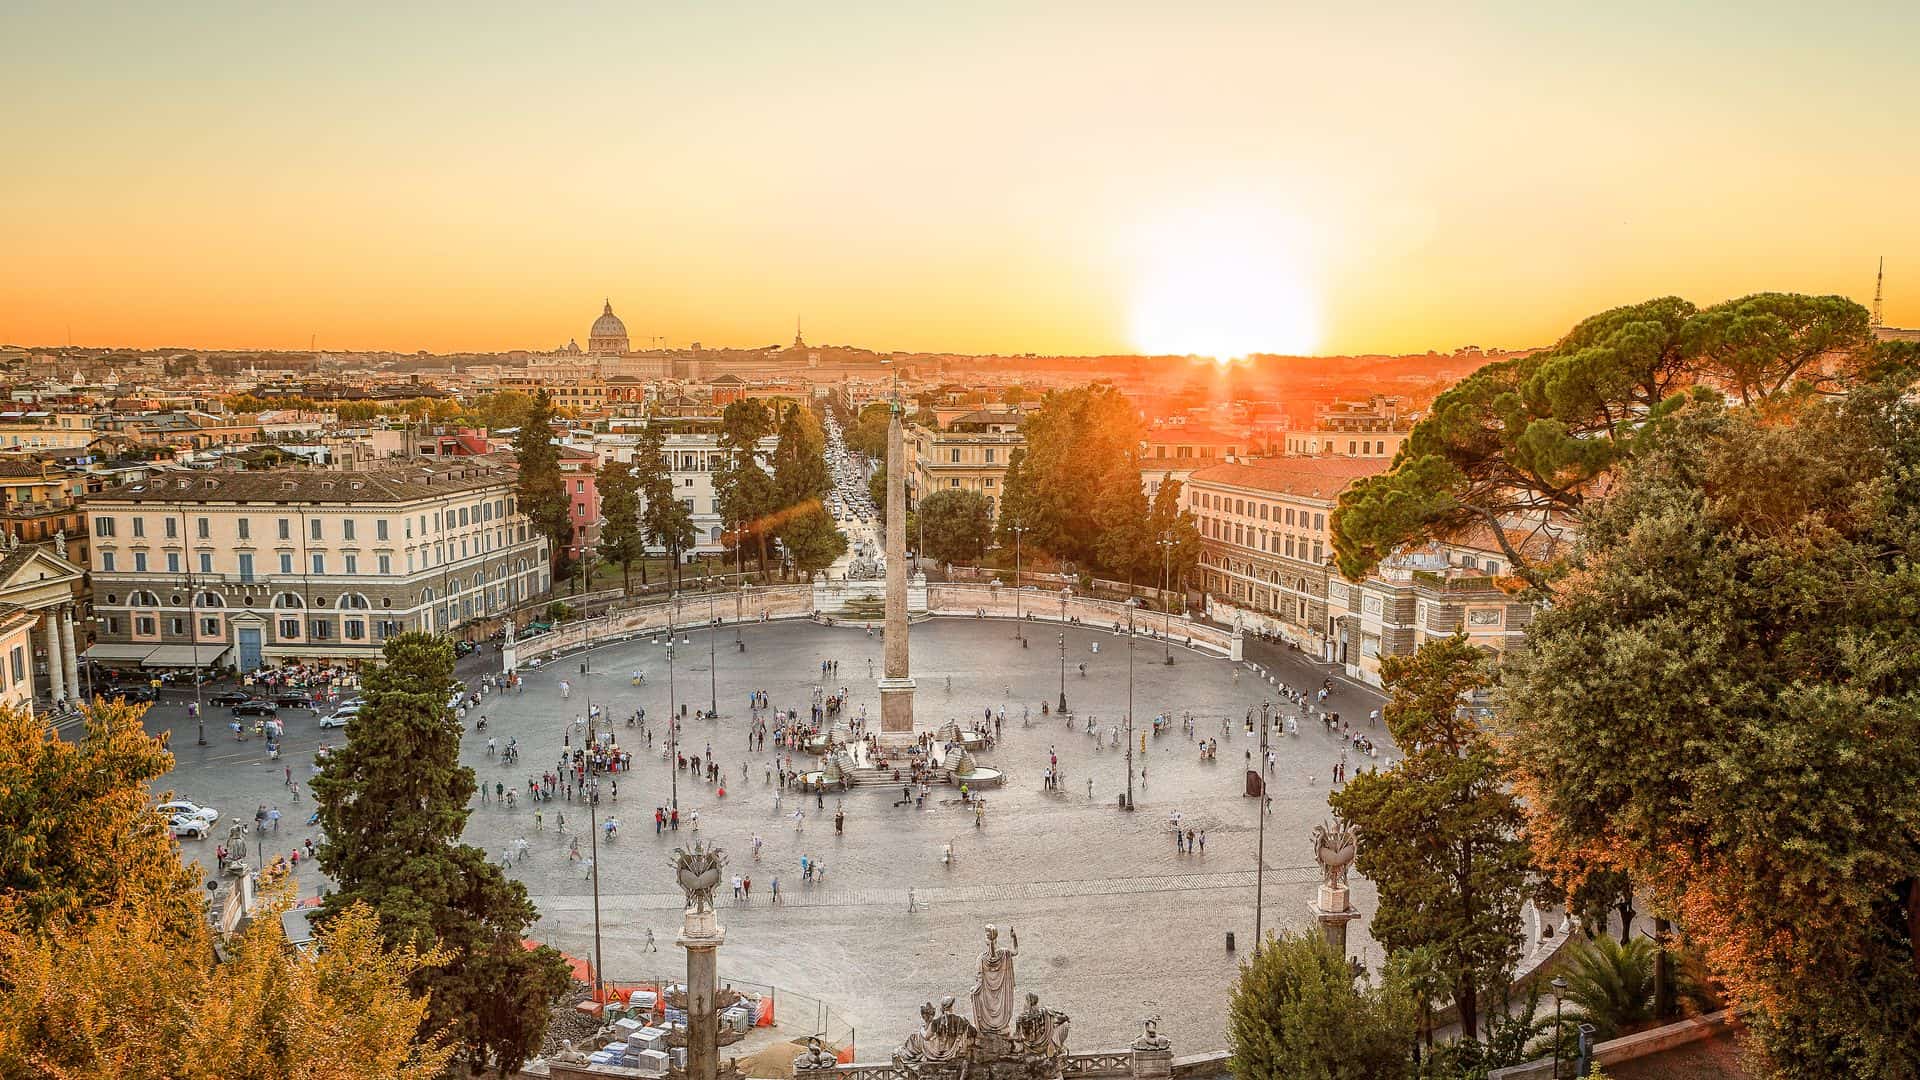 The Piazza del Popolo in Rome at sunset